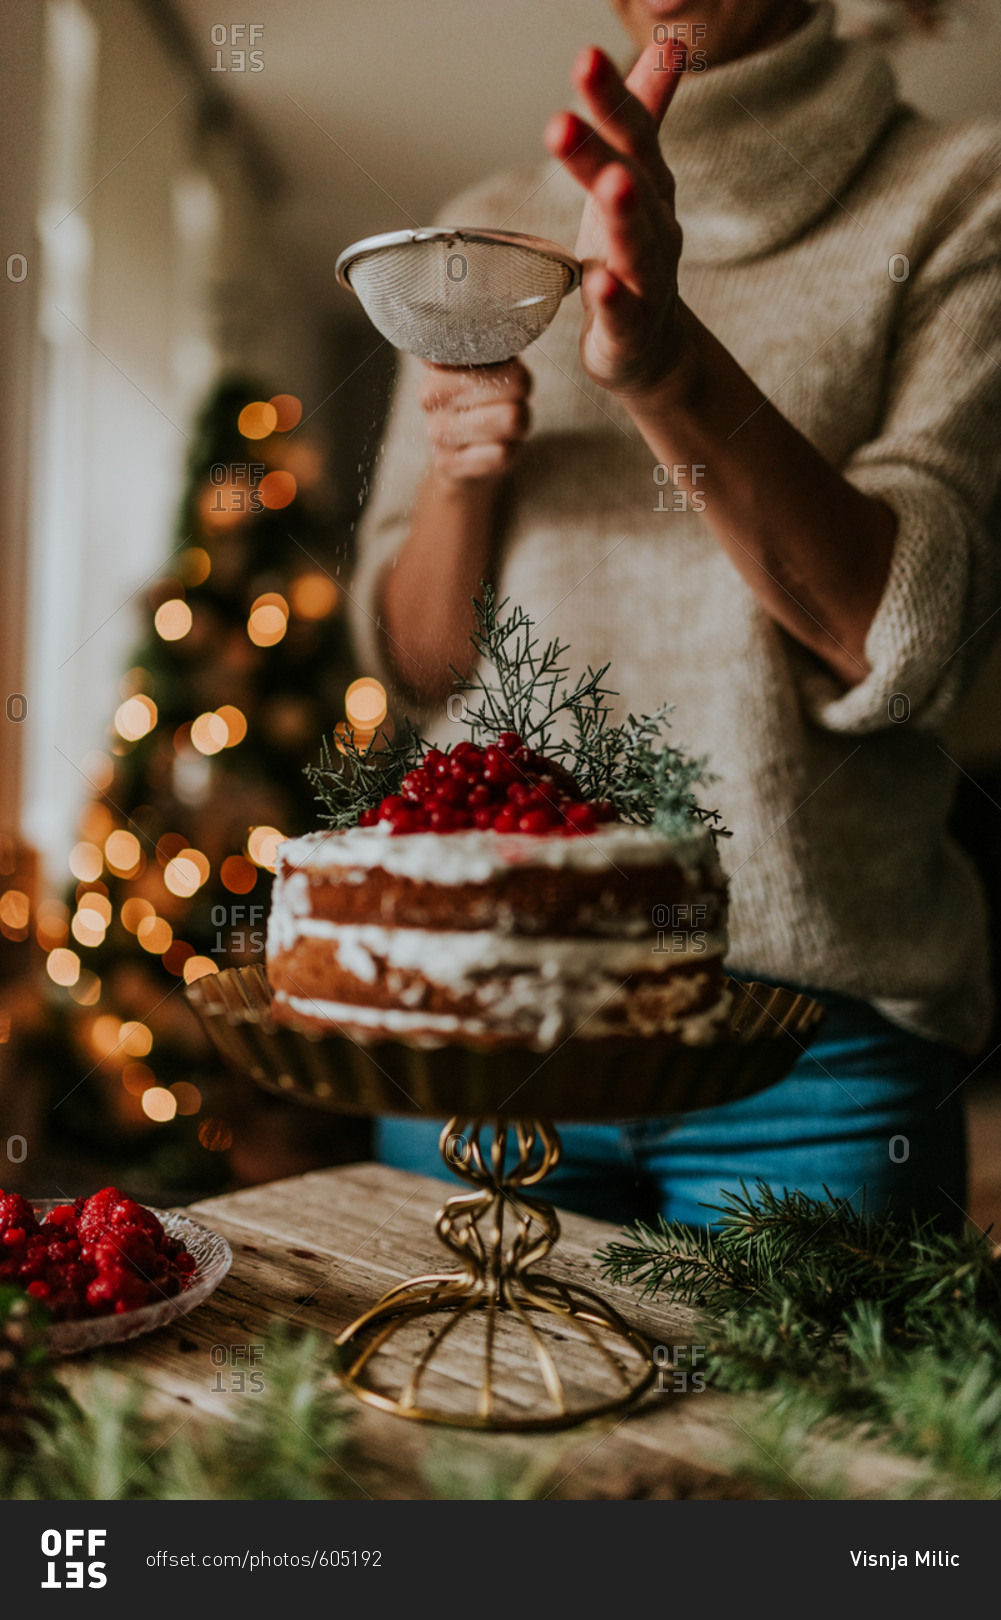 Woman decorating winter inspired naked cake with powdered sugar with Christmas tree in the background